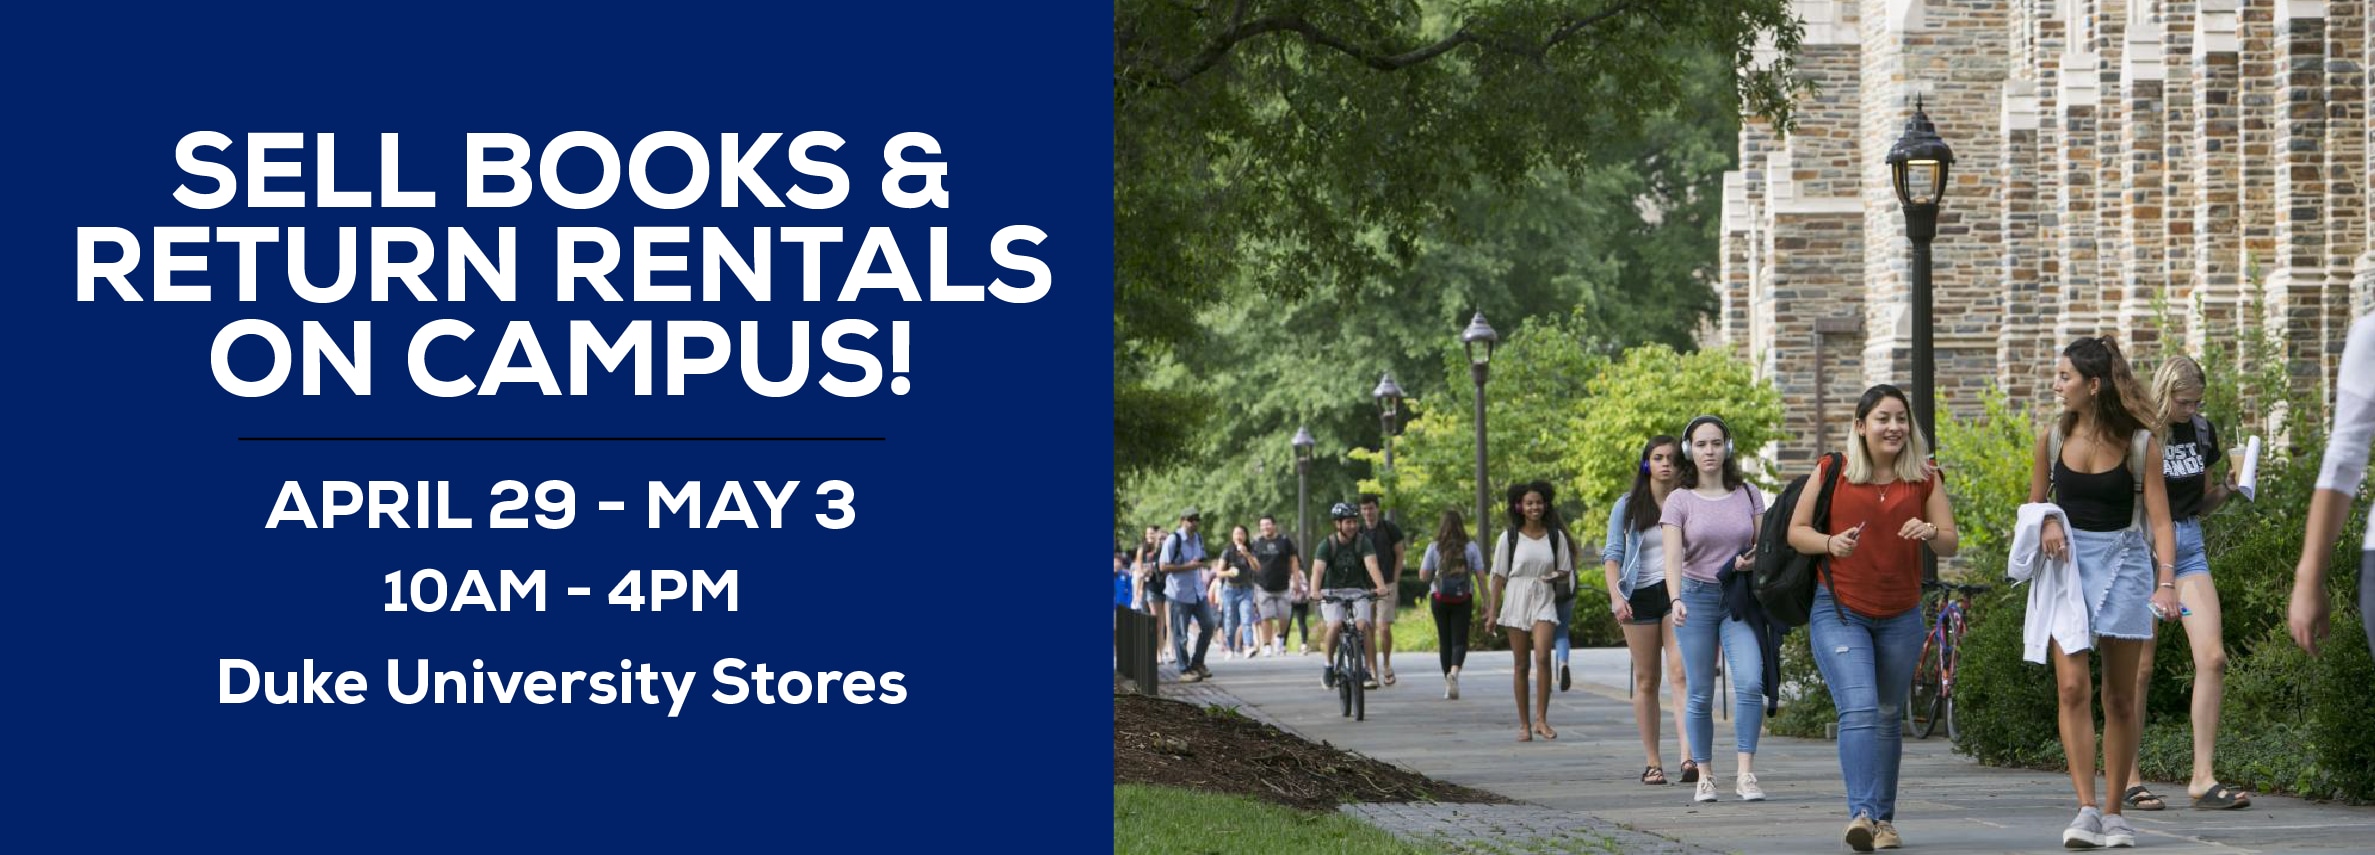 Sell books and return rentals on campus! April 29 - May 3 | 10am to 4pm. Duke University Stores